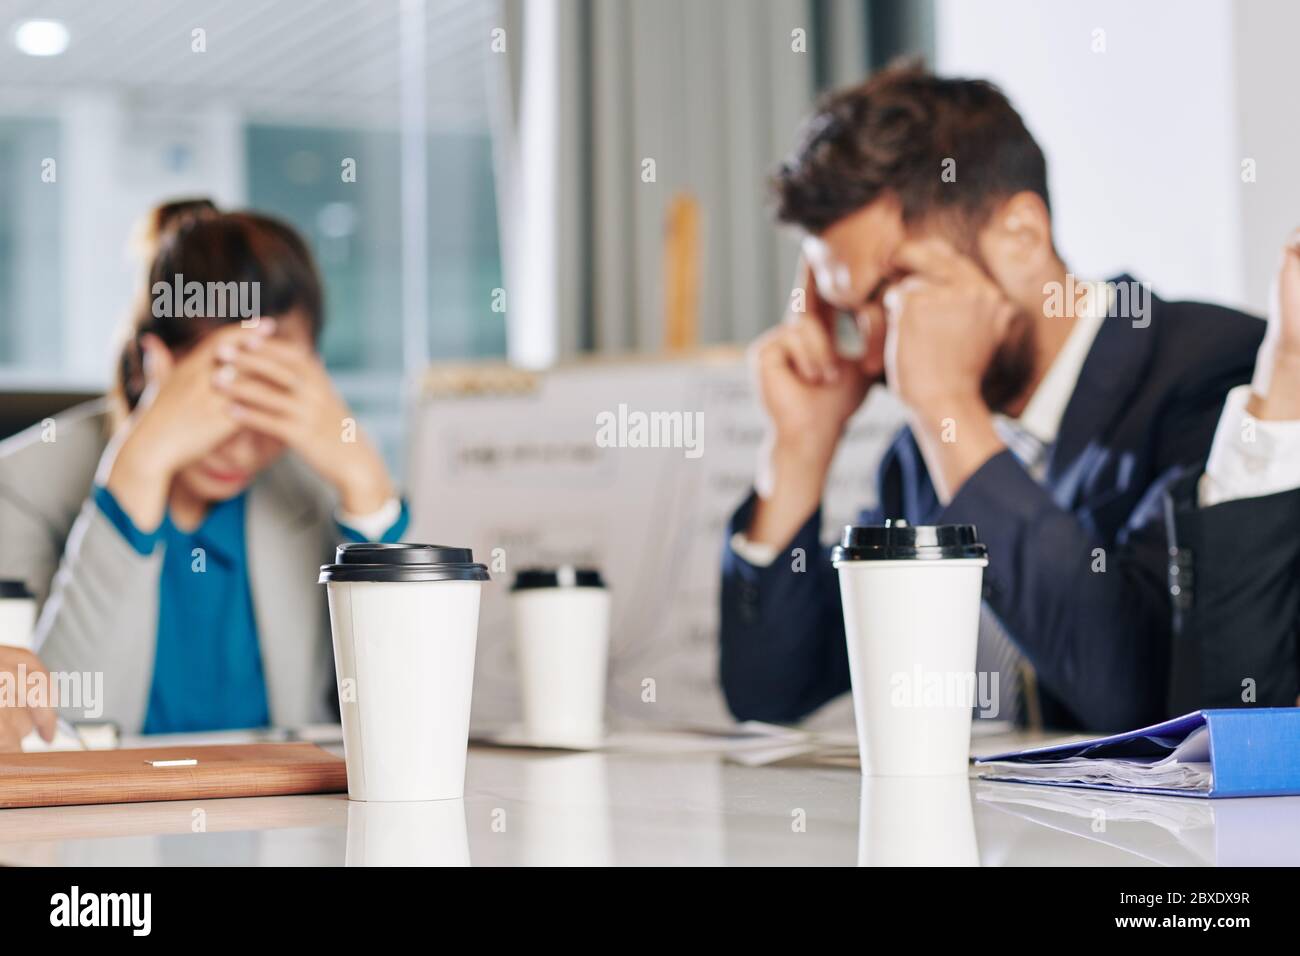 Cups of take out coffee on table in front of business people meeting to discuss economic consequences of covid-19 pandemic Stock Photo